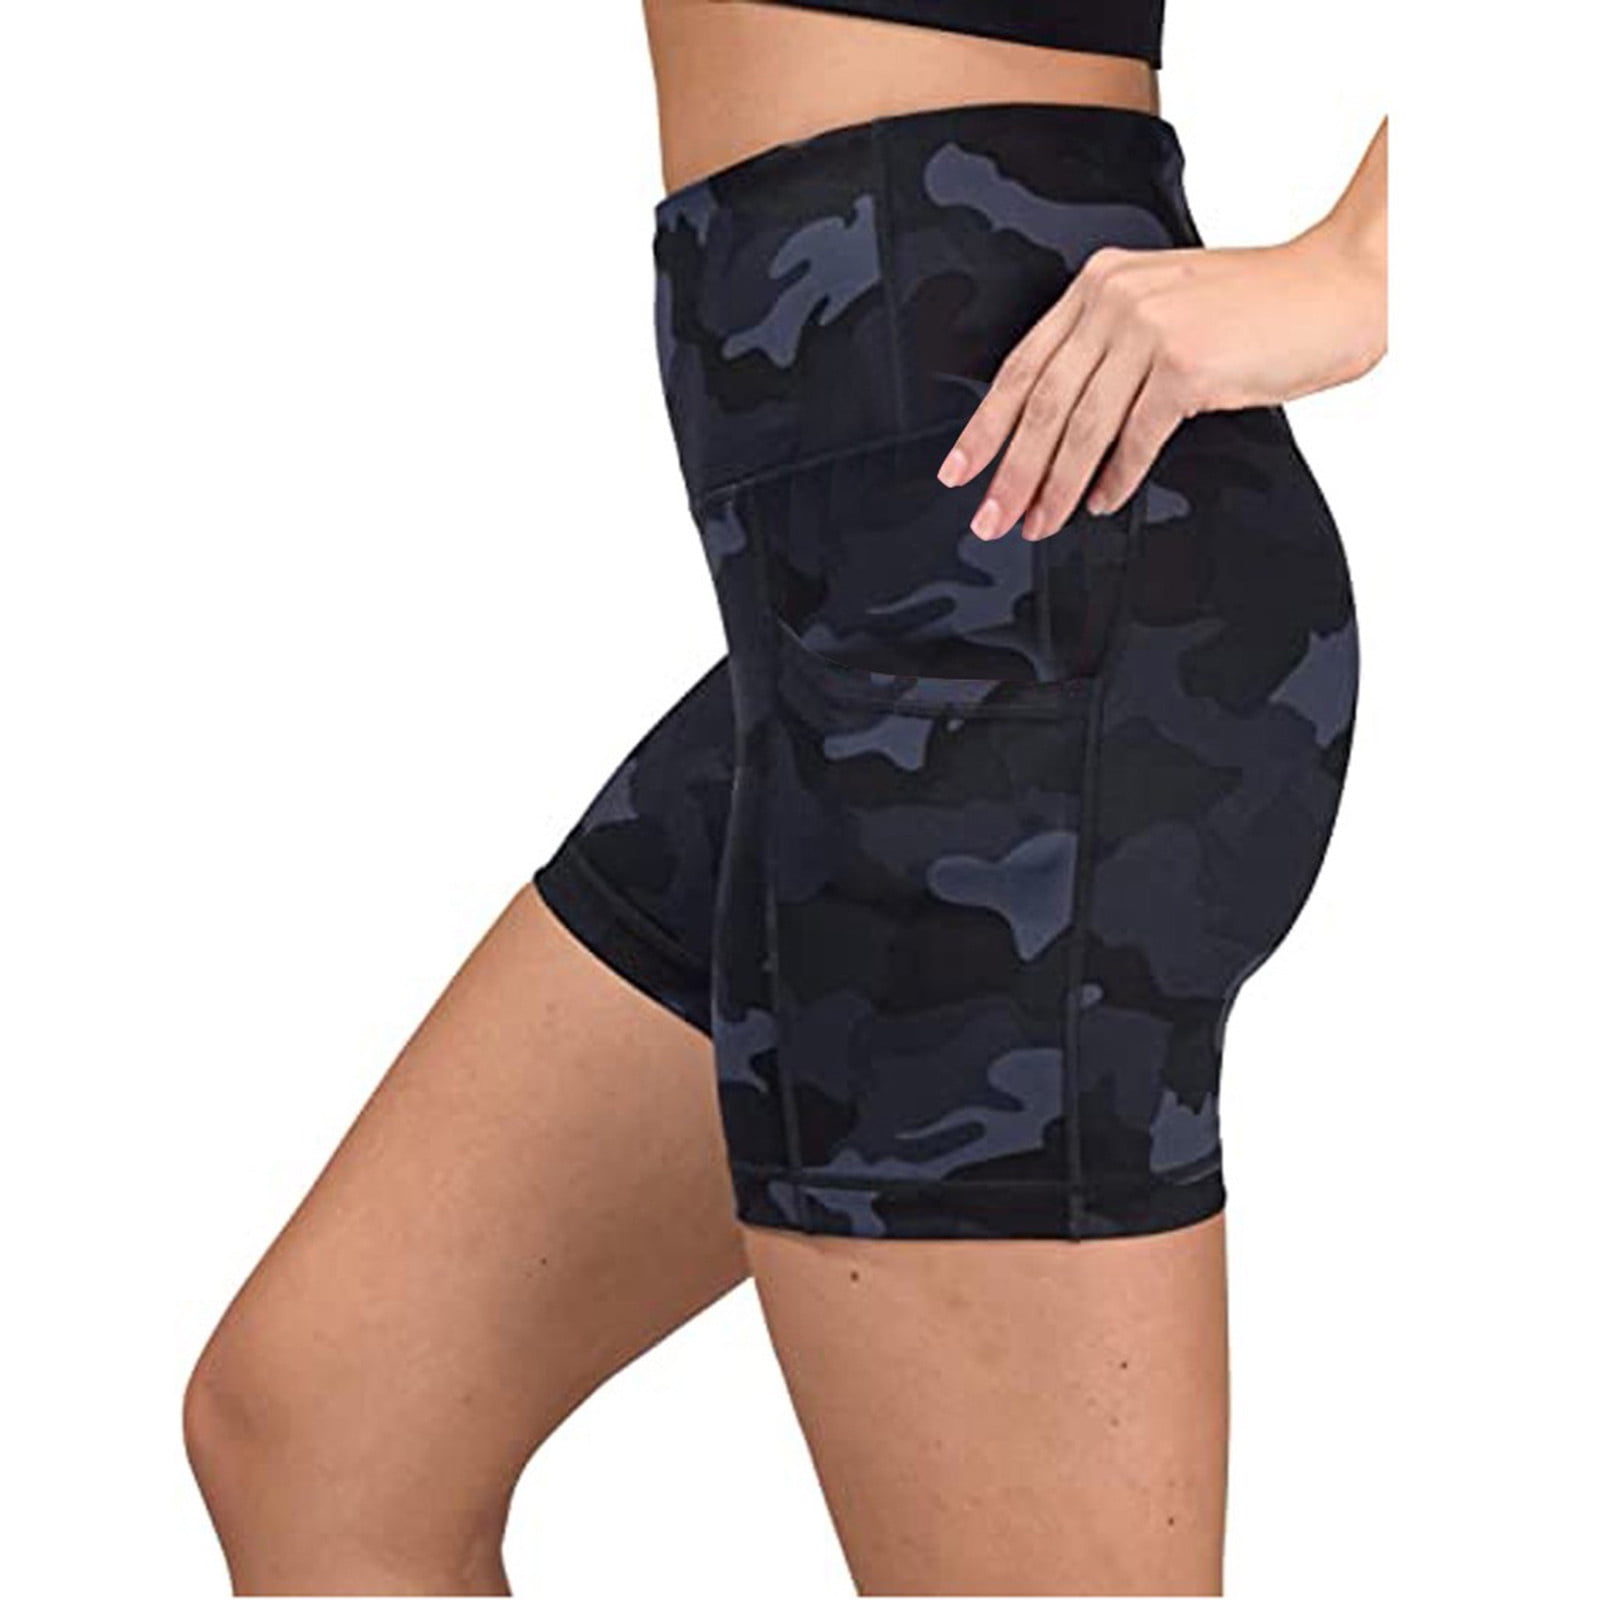 YYDGH Women's High Waist Camouflage Print Workout Yoga Shorts with 2 Hidden  Pockets, Non See-Through Tummy Control Athletic Shorts Navy Blue XXL -  Walmart.com